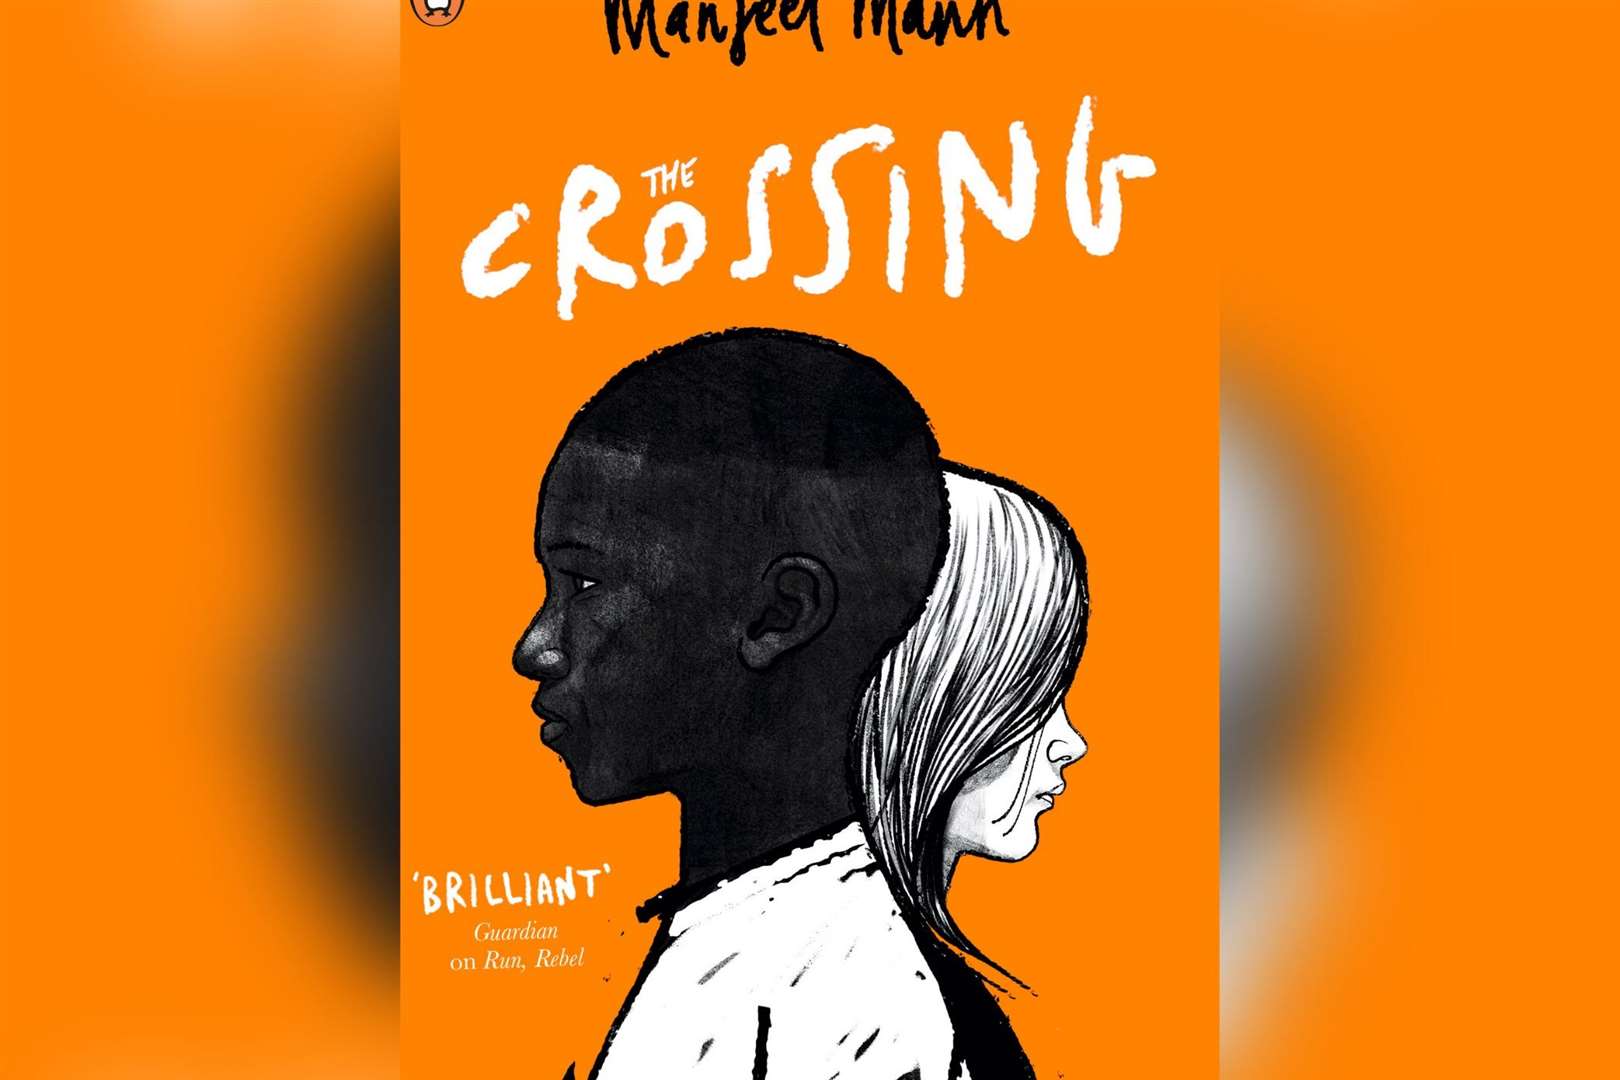 The cover of Mann's book The Crossing, set in Dover